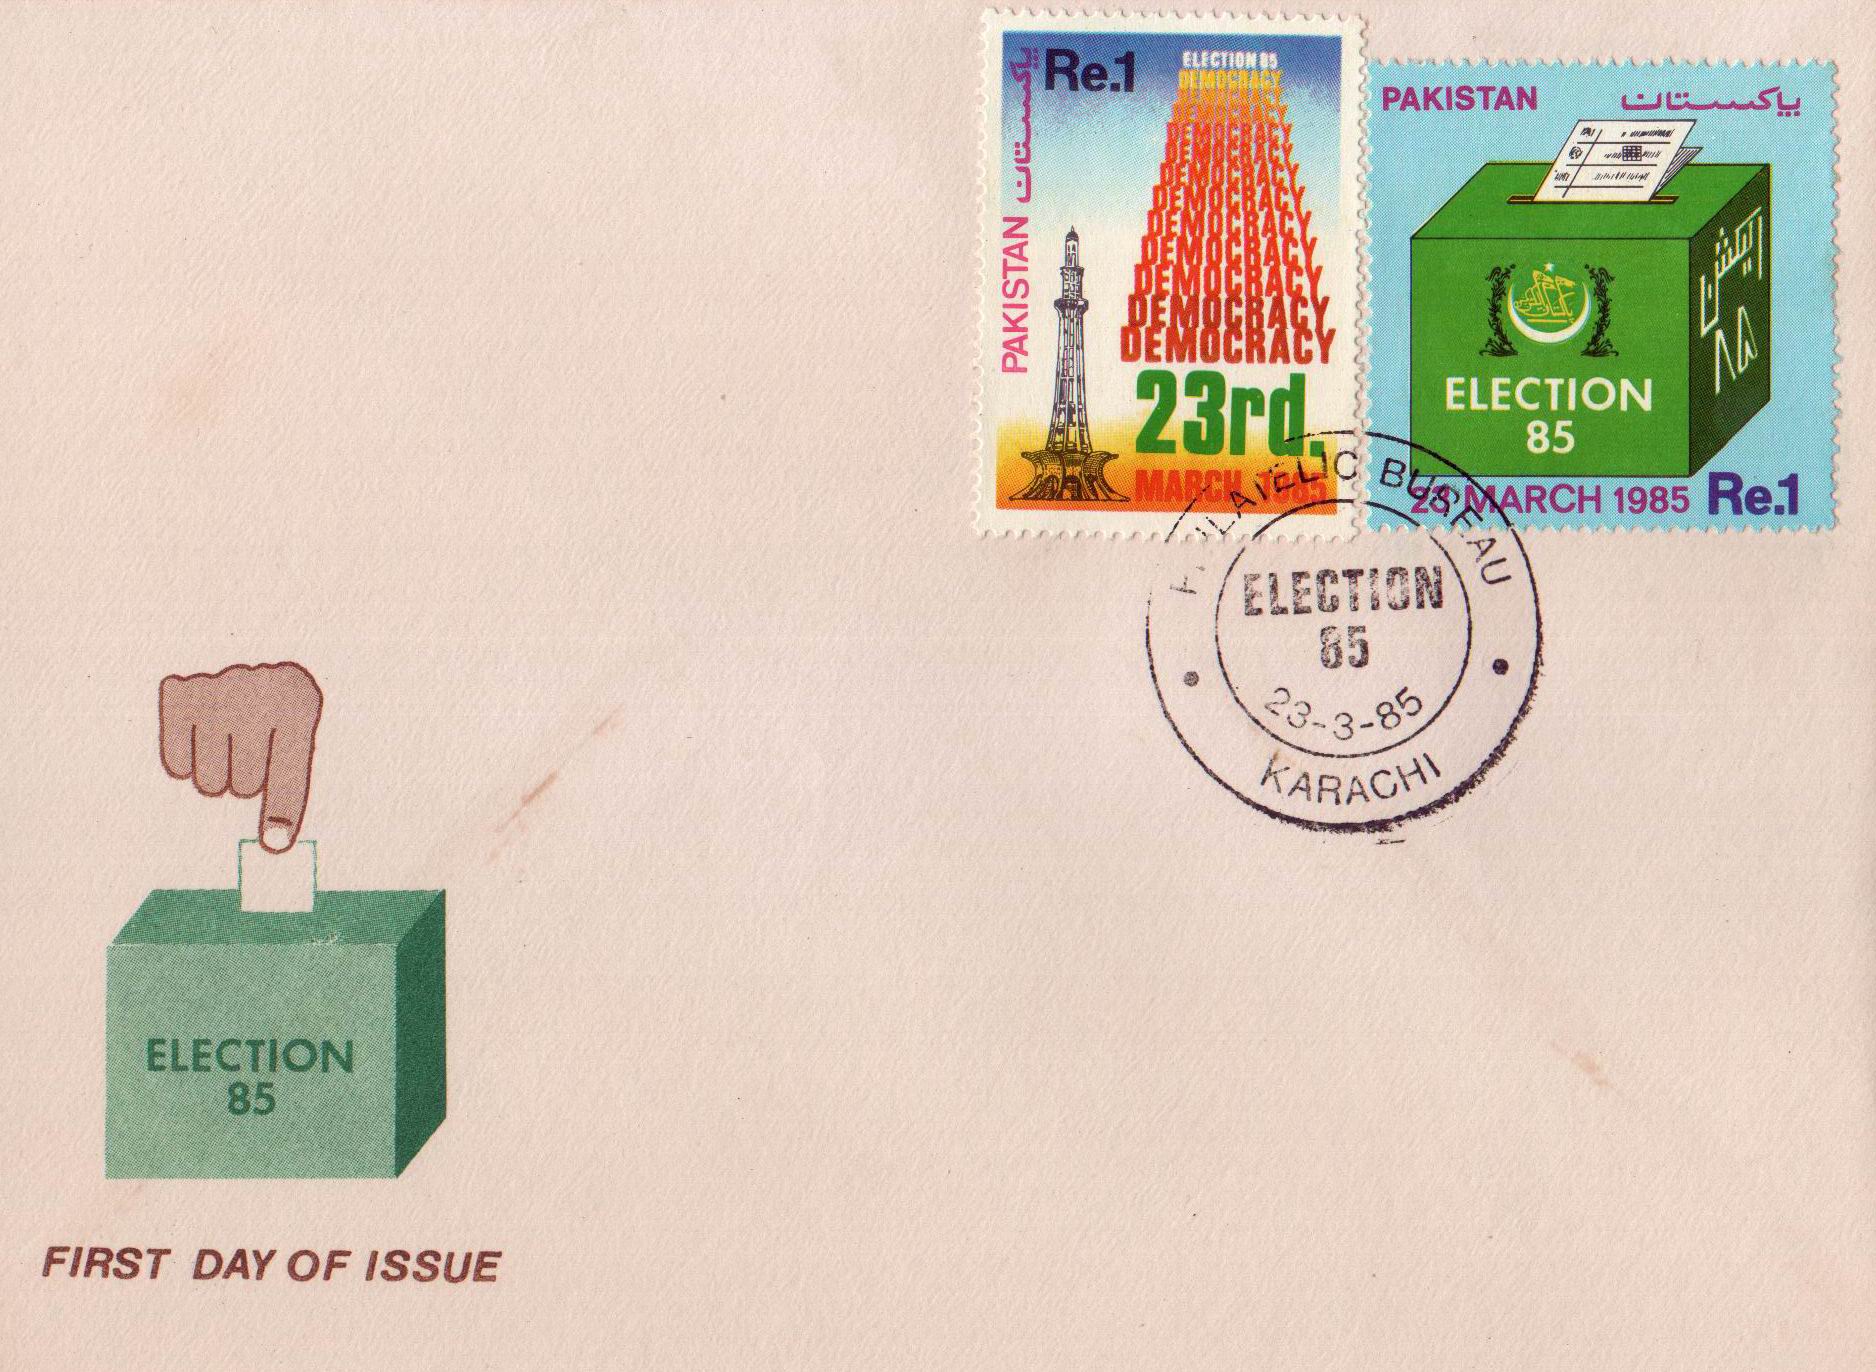 Pakistan Fdc 1985 Brochure & Stamps Election 1985 - Click Image to Close